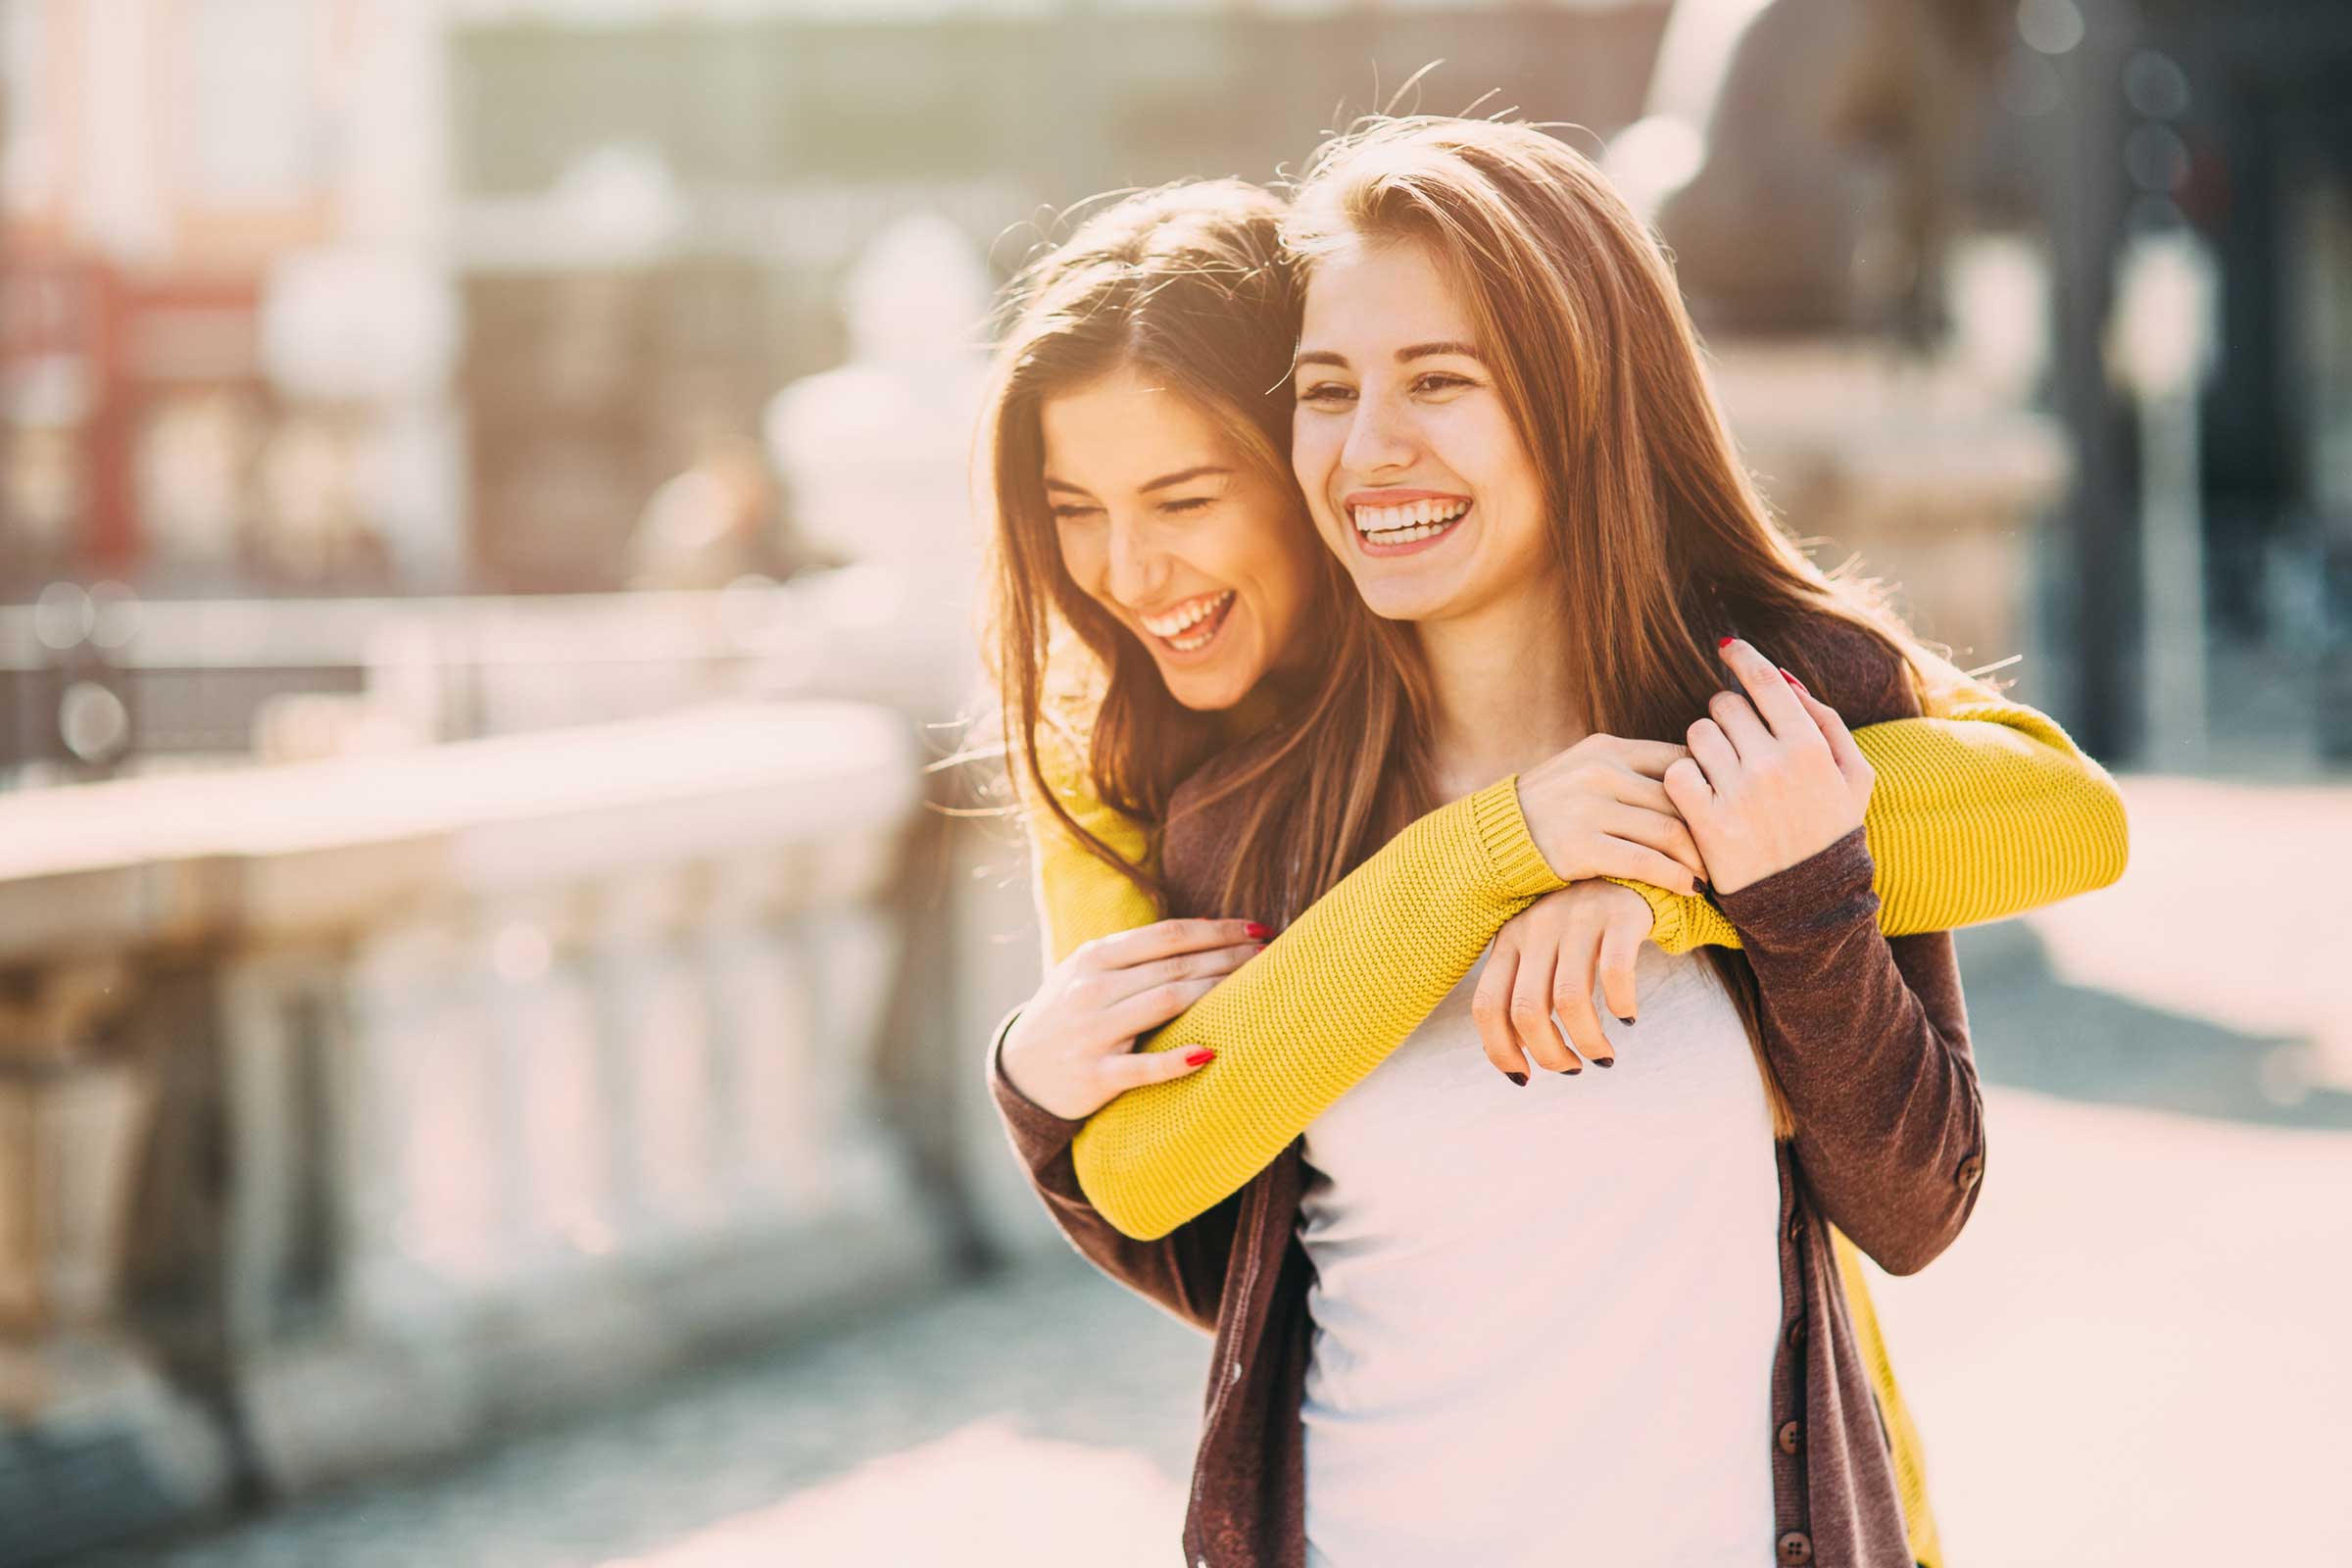 Best Friends Every Adult Woman Should Have | Reader's Digest